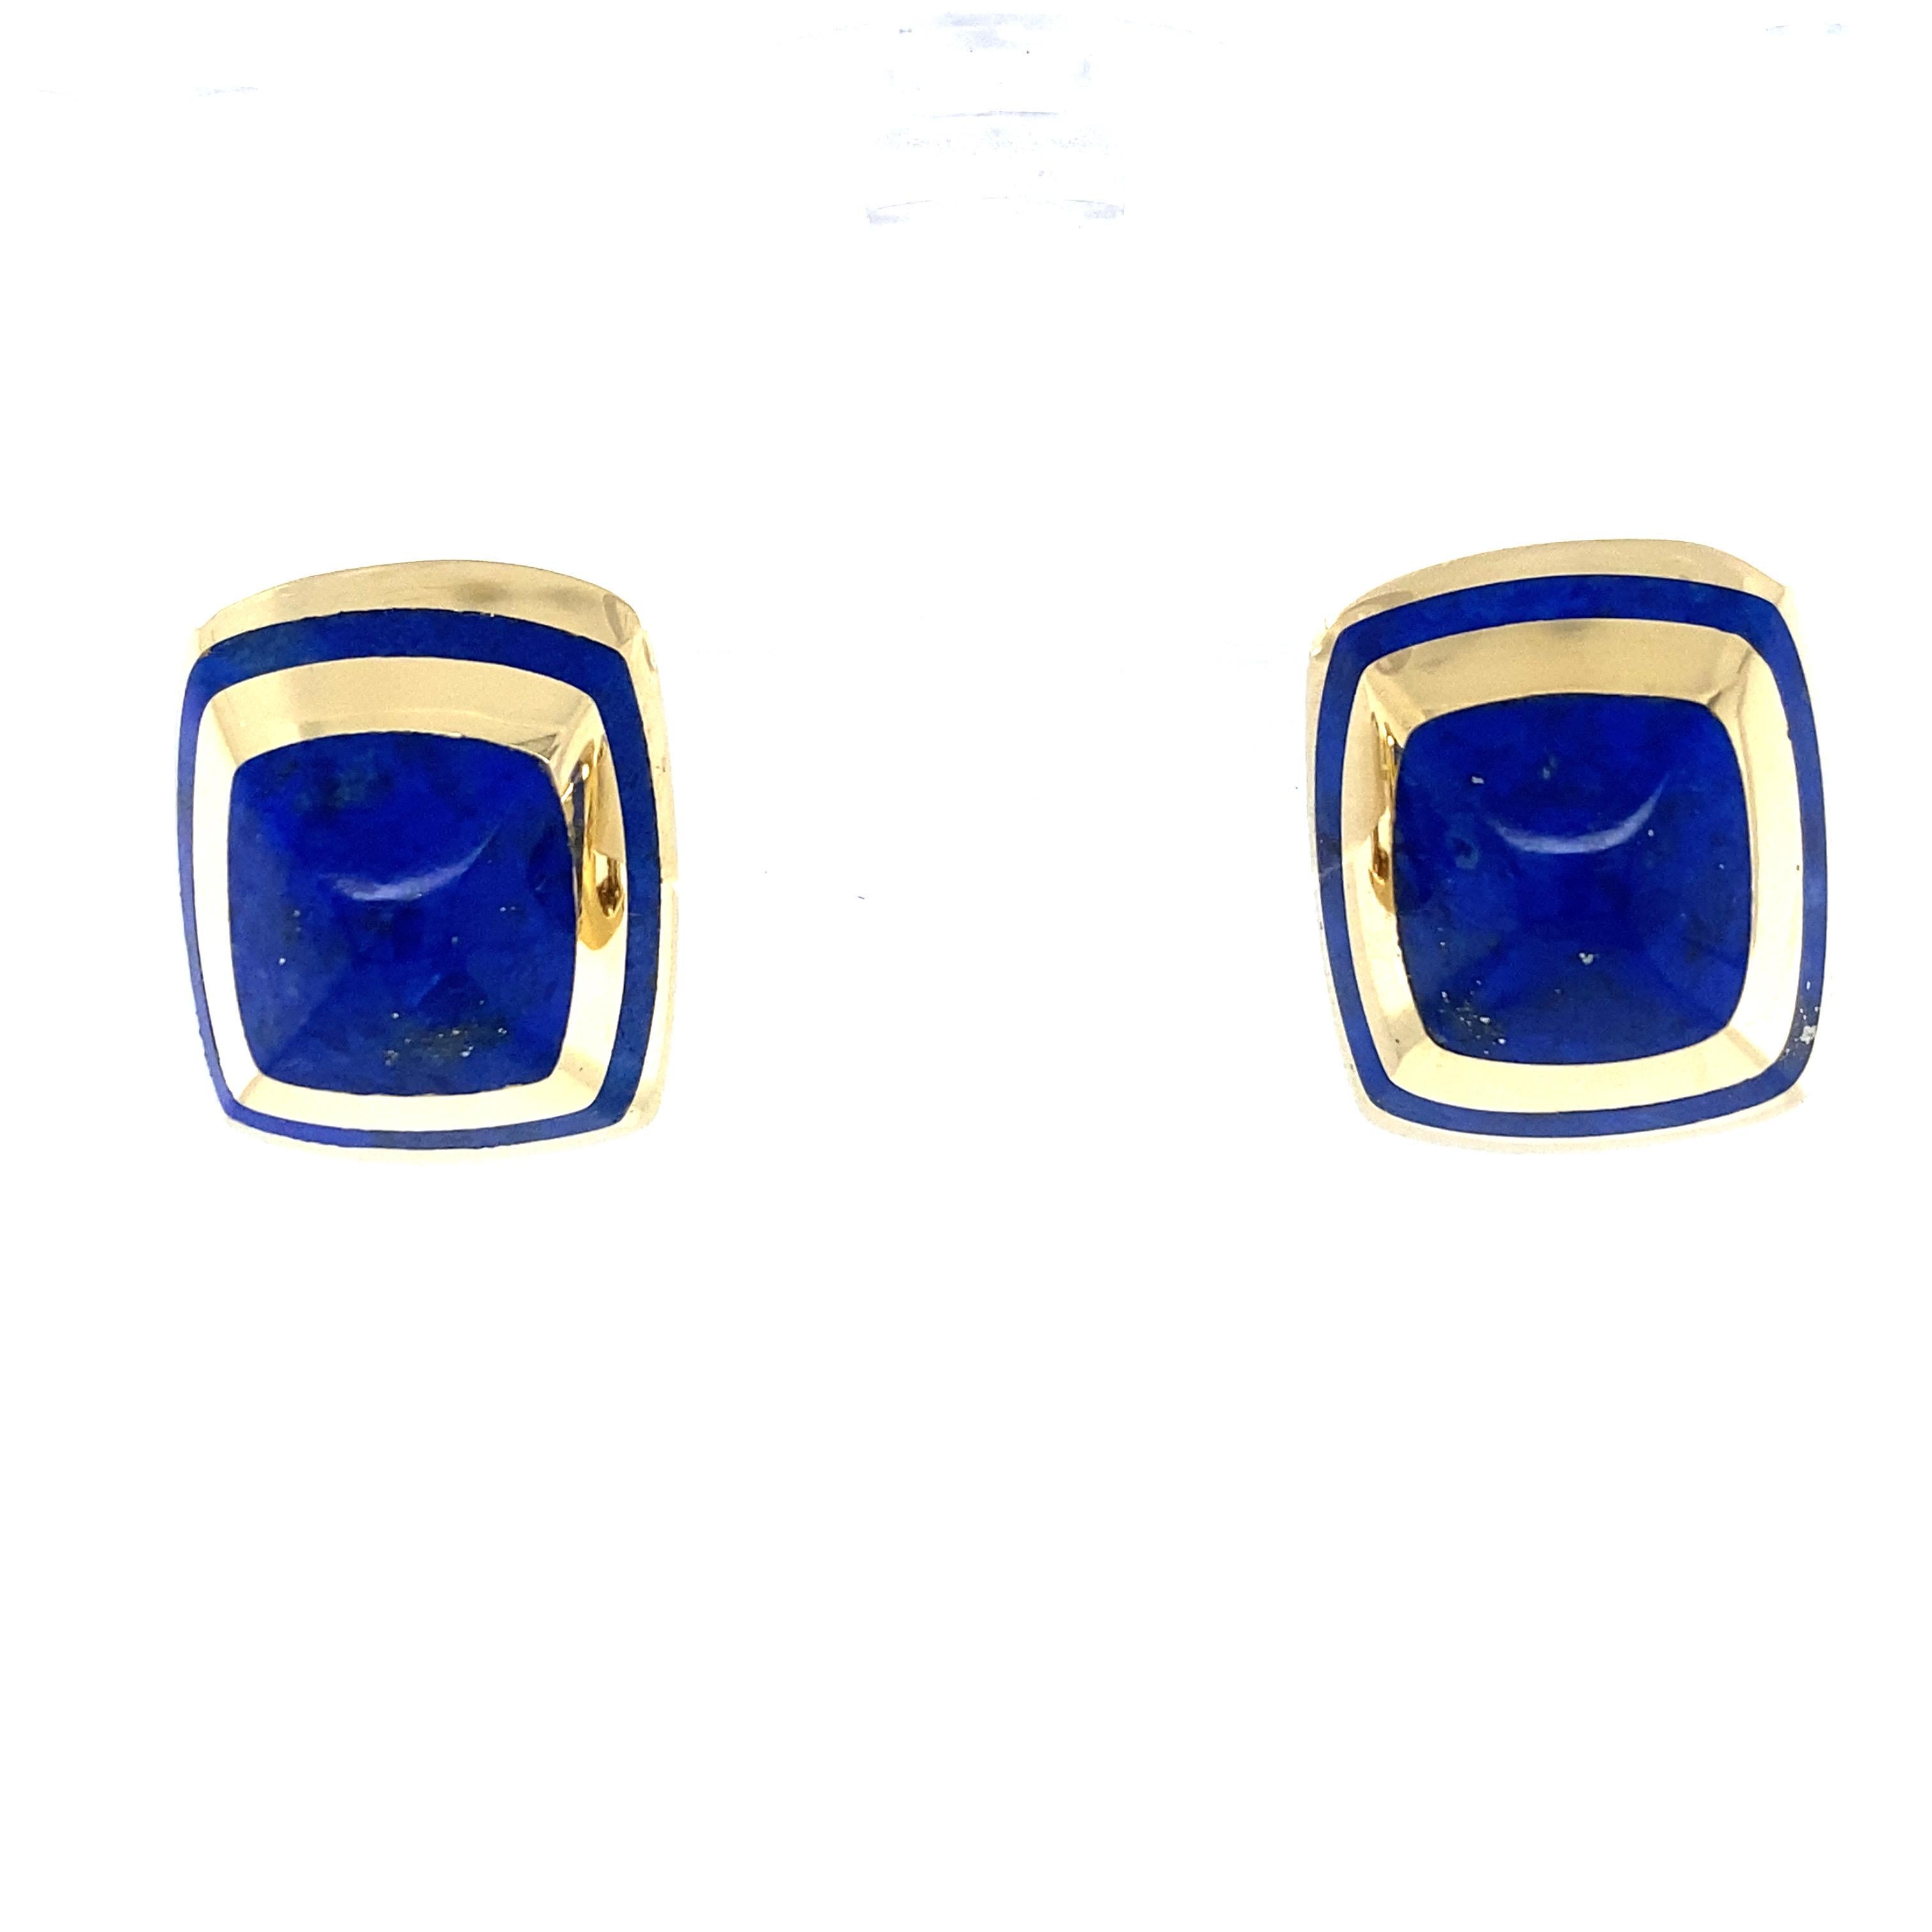 Blue Lapis Drop Lever-Back Earrings in 18K Yellow Gold.  The Earrings measure 3/4 inch in length and 10/16 inch in width. Lever-Back closure.  Made in Italy. 19.7 grams.